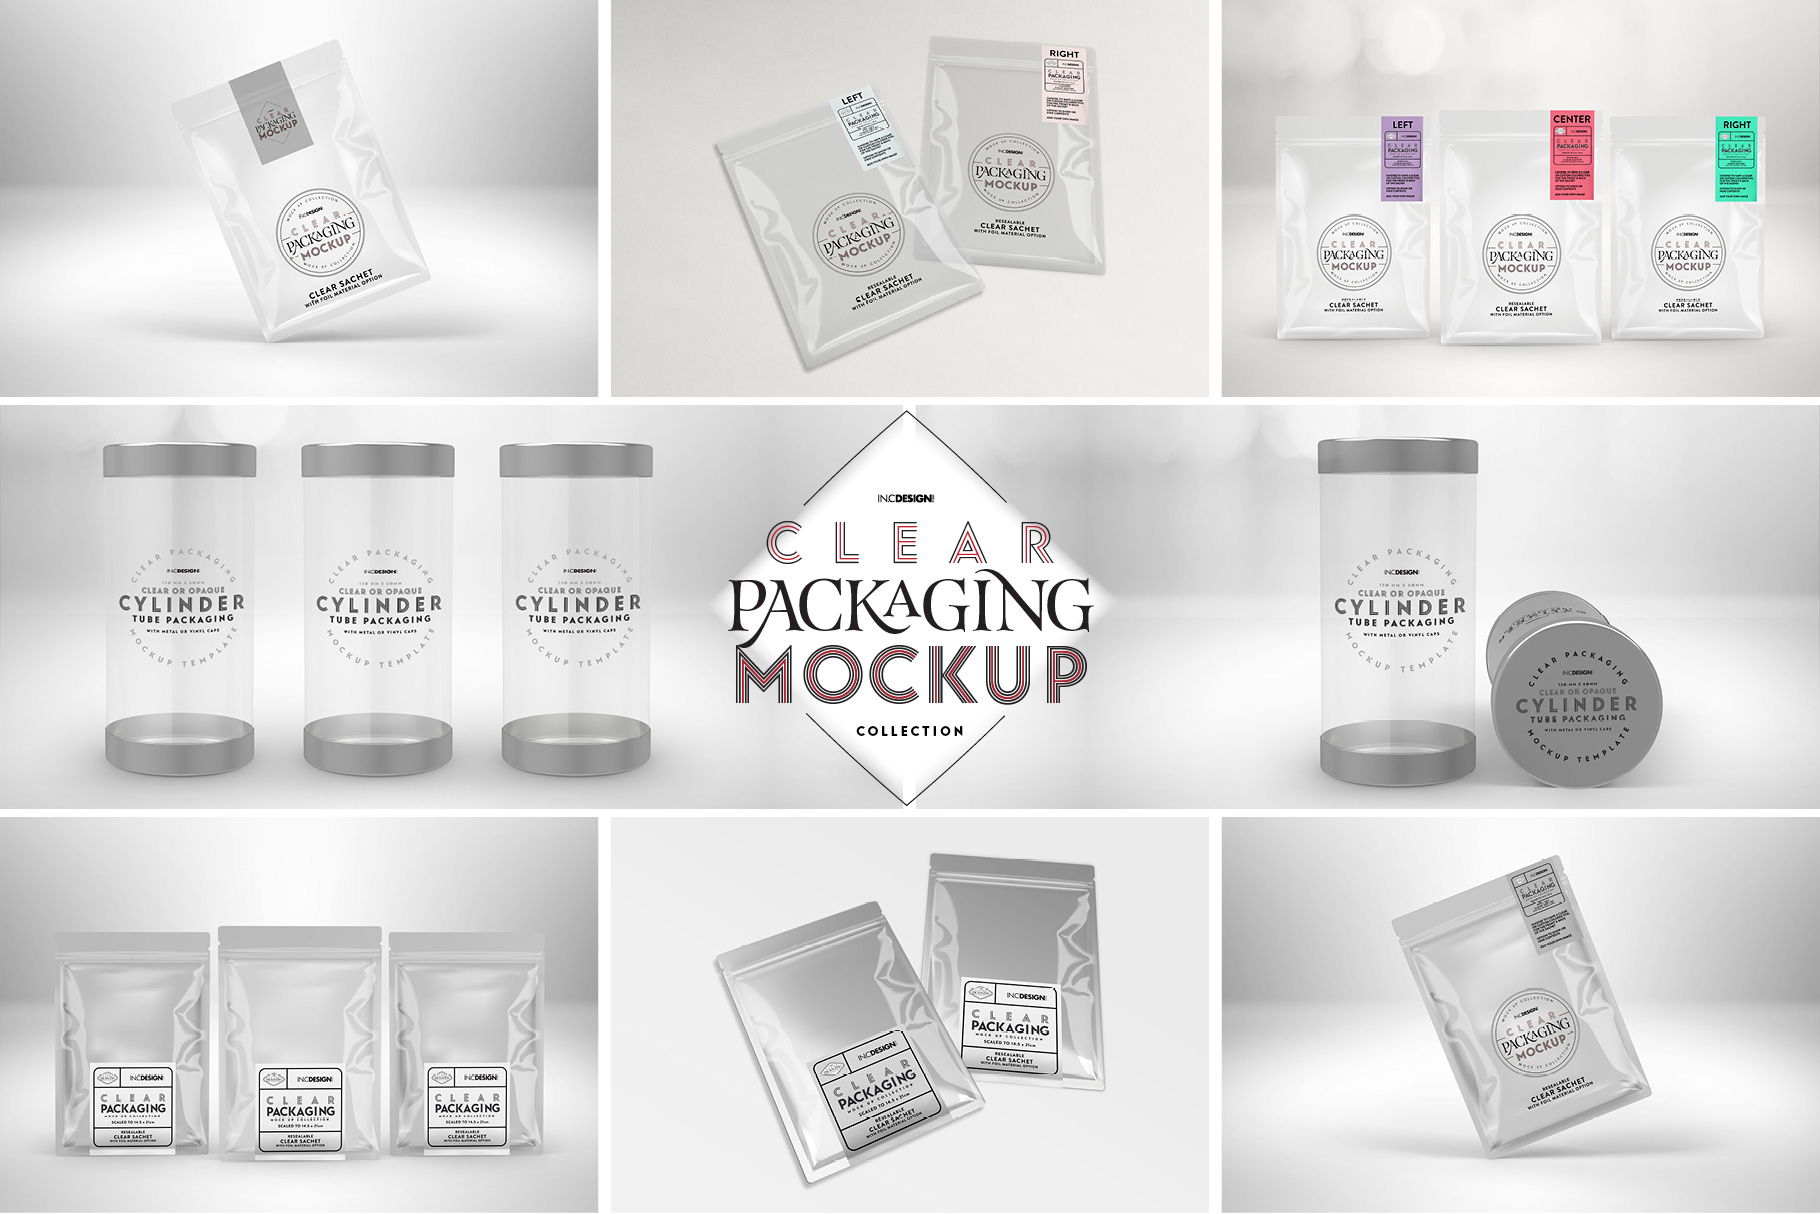 Clear Round Sauce Containers Packaging MockUp By INC Design Studio